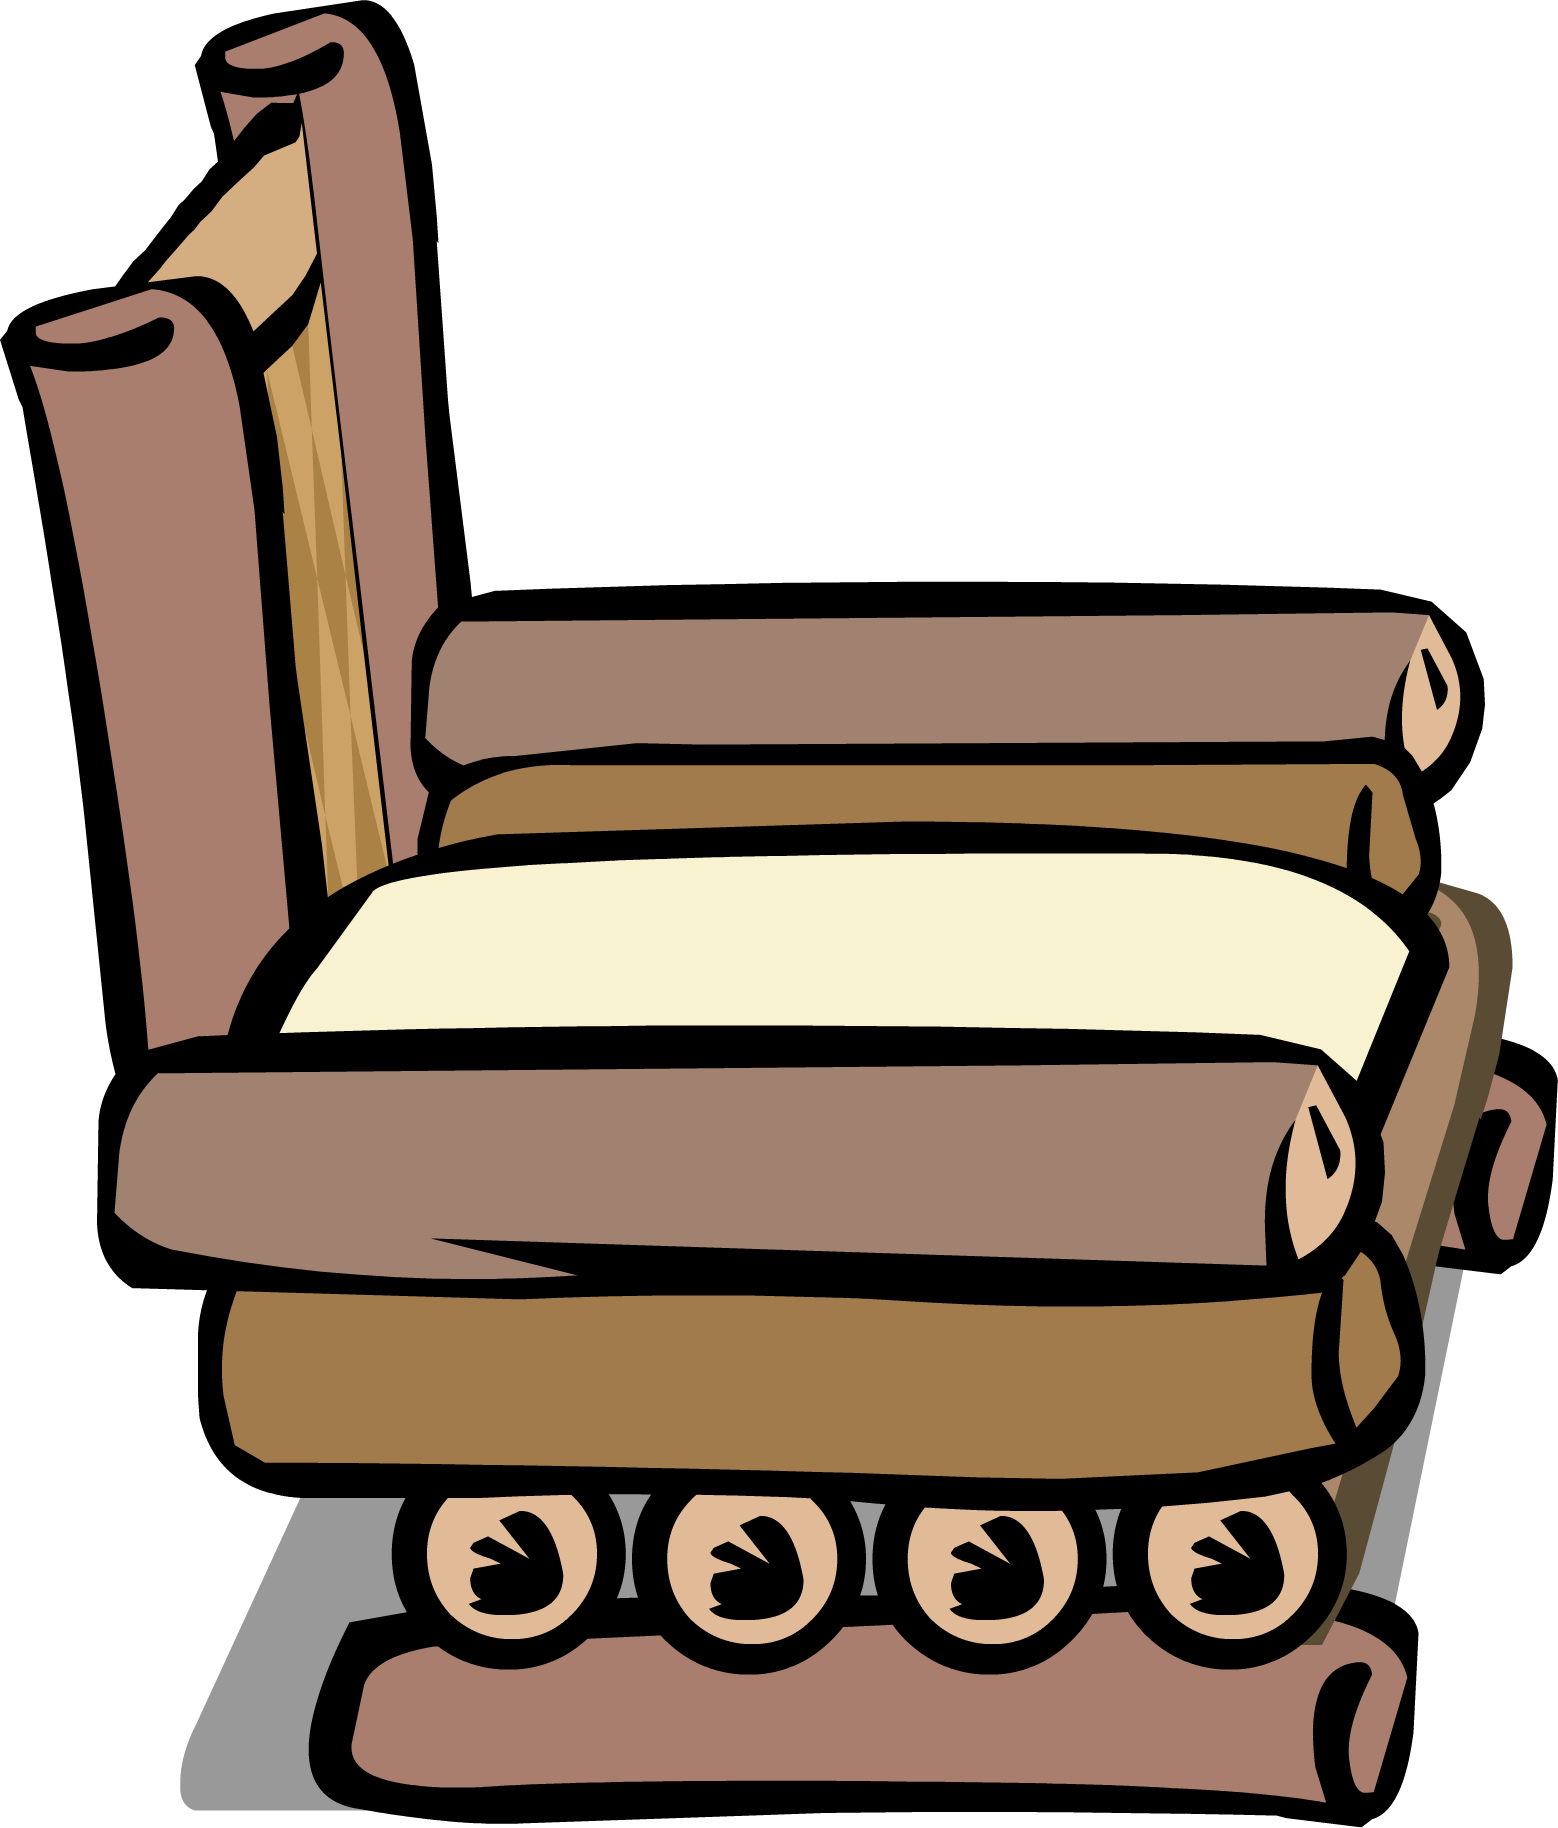 Clipart chair bamboo chair. Image sprite png club